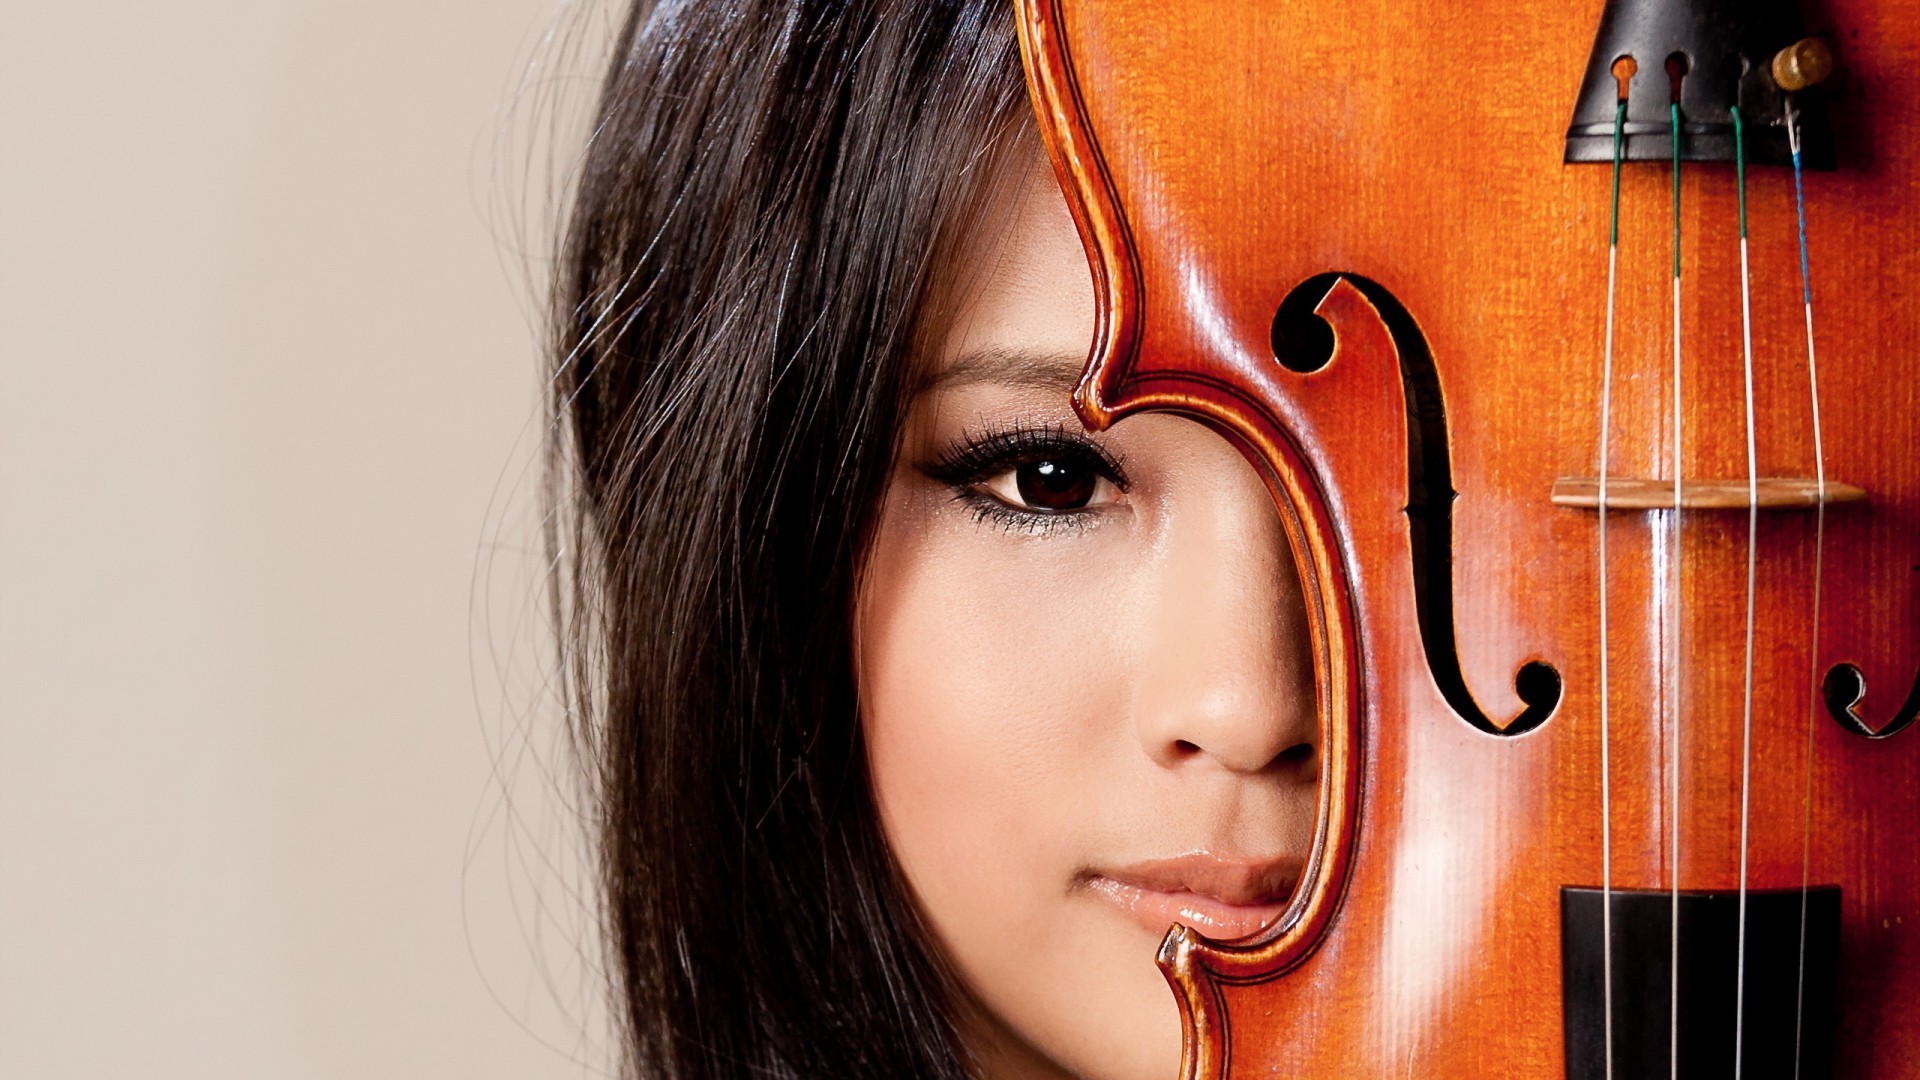 women, Model, Brunette, Asian, Long Hair, Face, Portrait, Violin, Musical Instrument, Brown Eyes, Looking At Viewer, Music, Simple Background Wallpaper